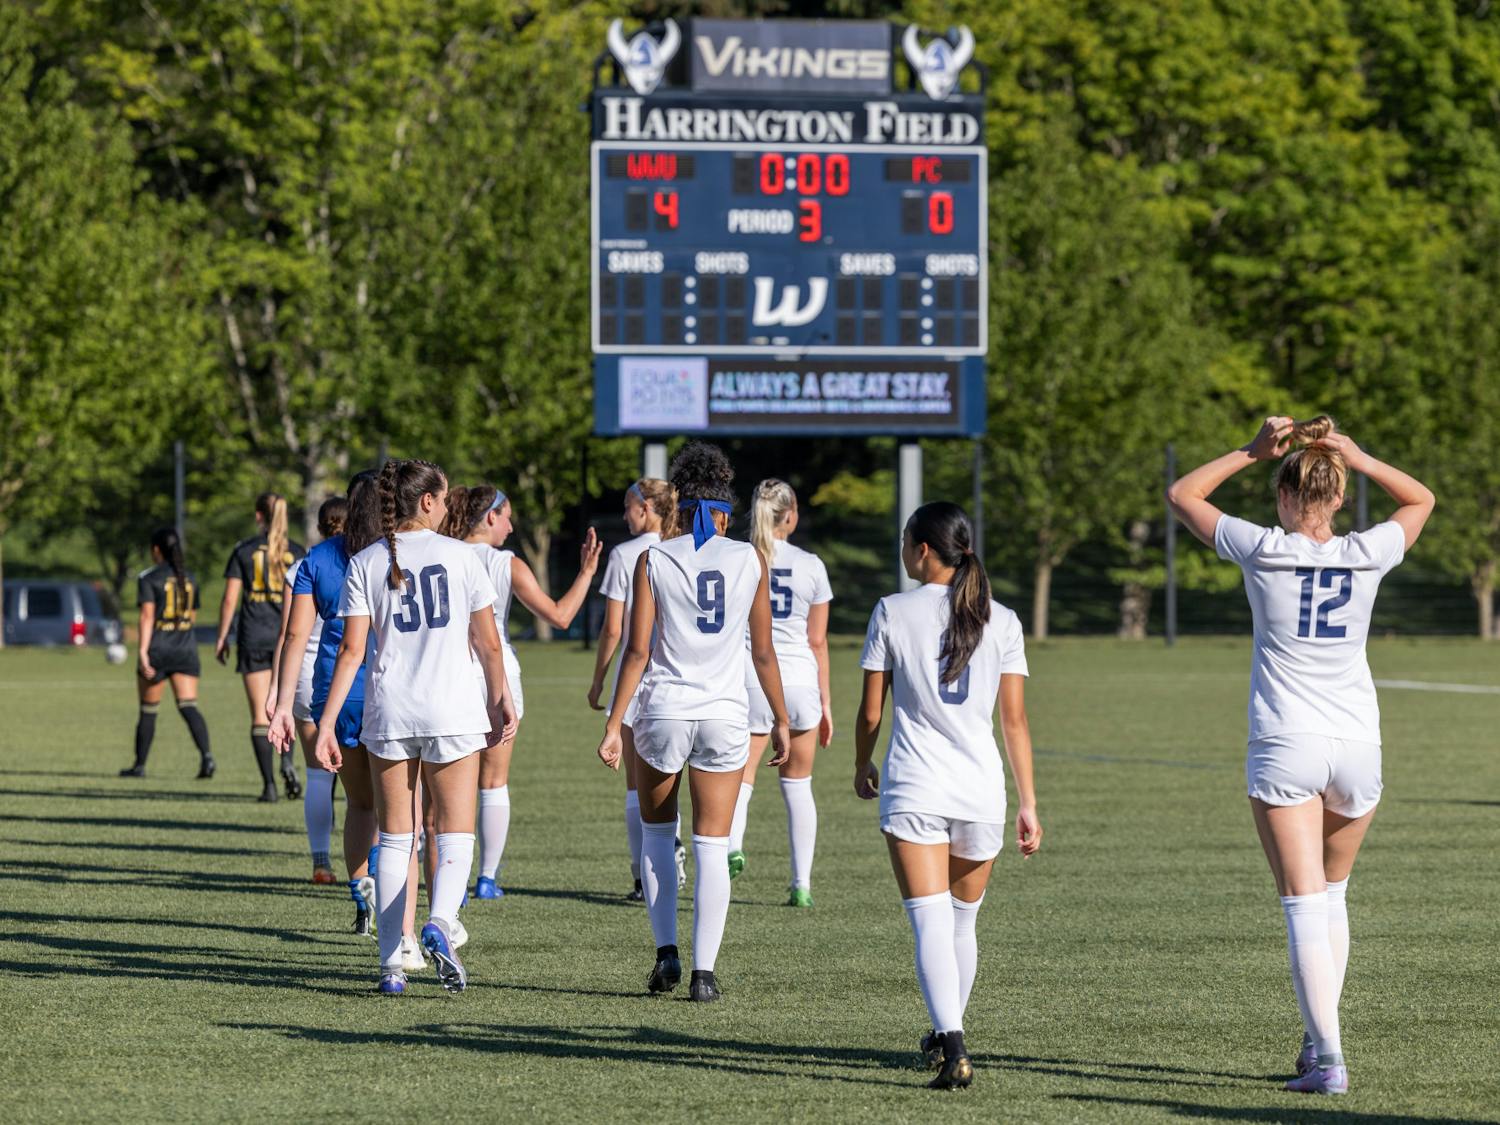 (1) WWU women’s soccer finish spring season with 4-0 victory